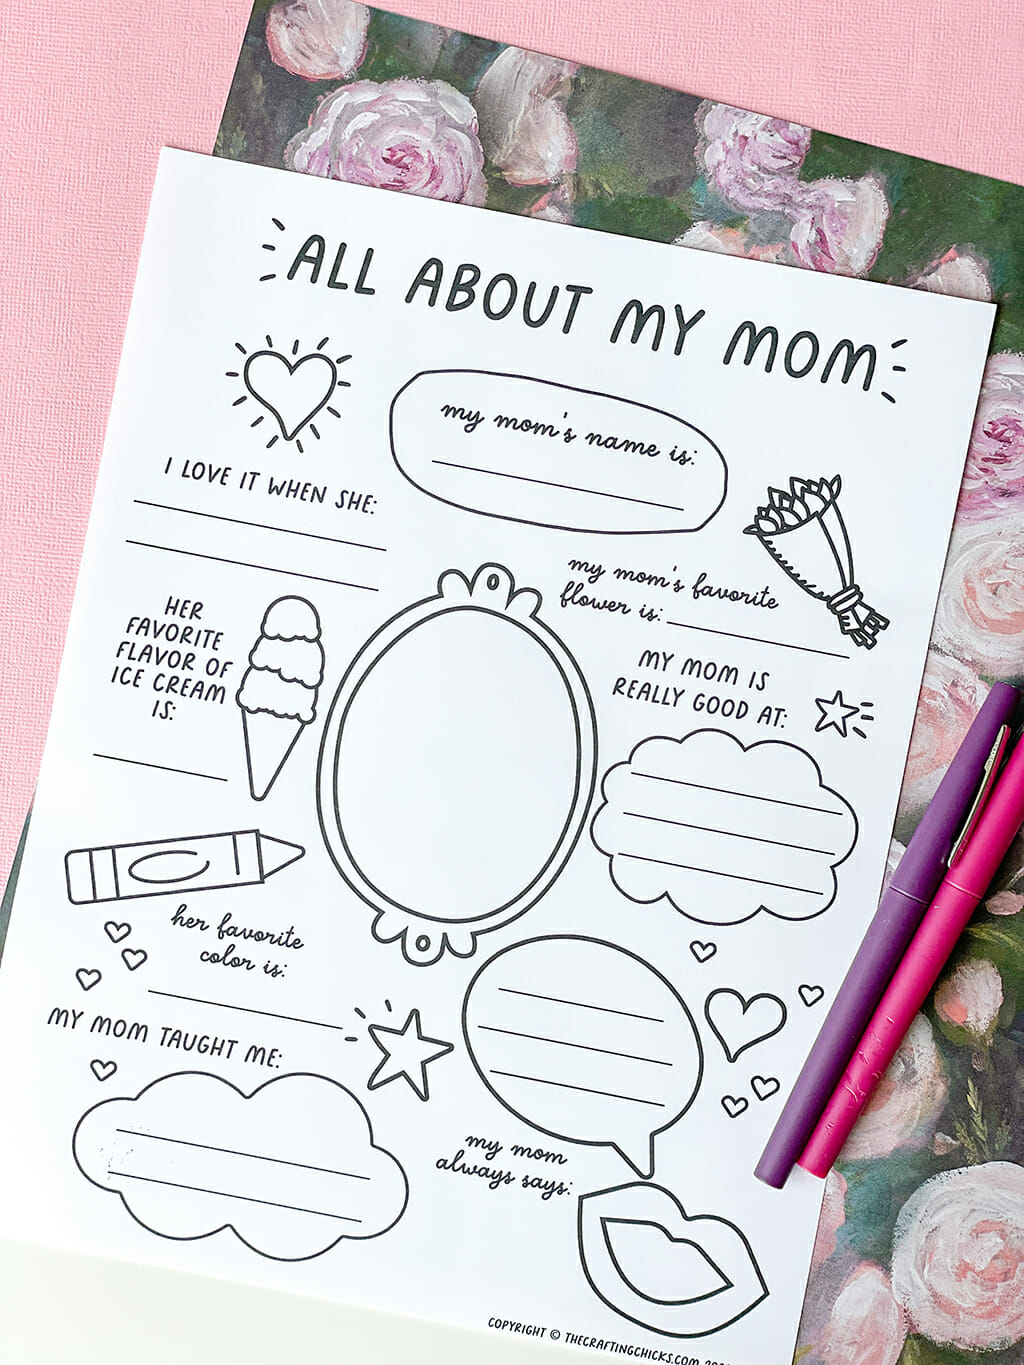 All About My Mom Free Printable on a floral and pink background